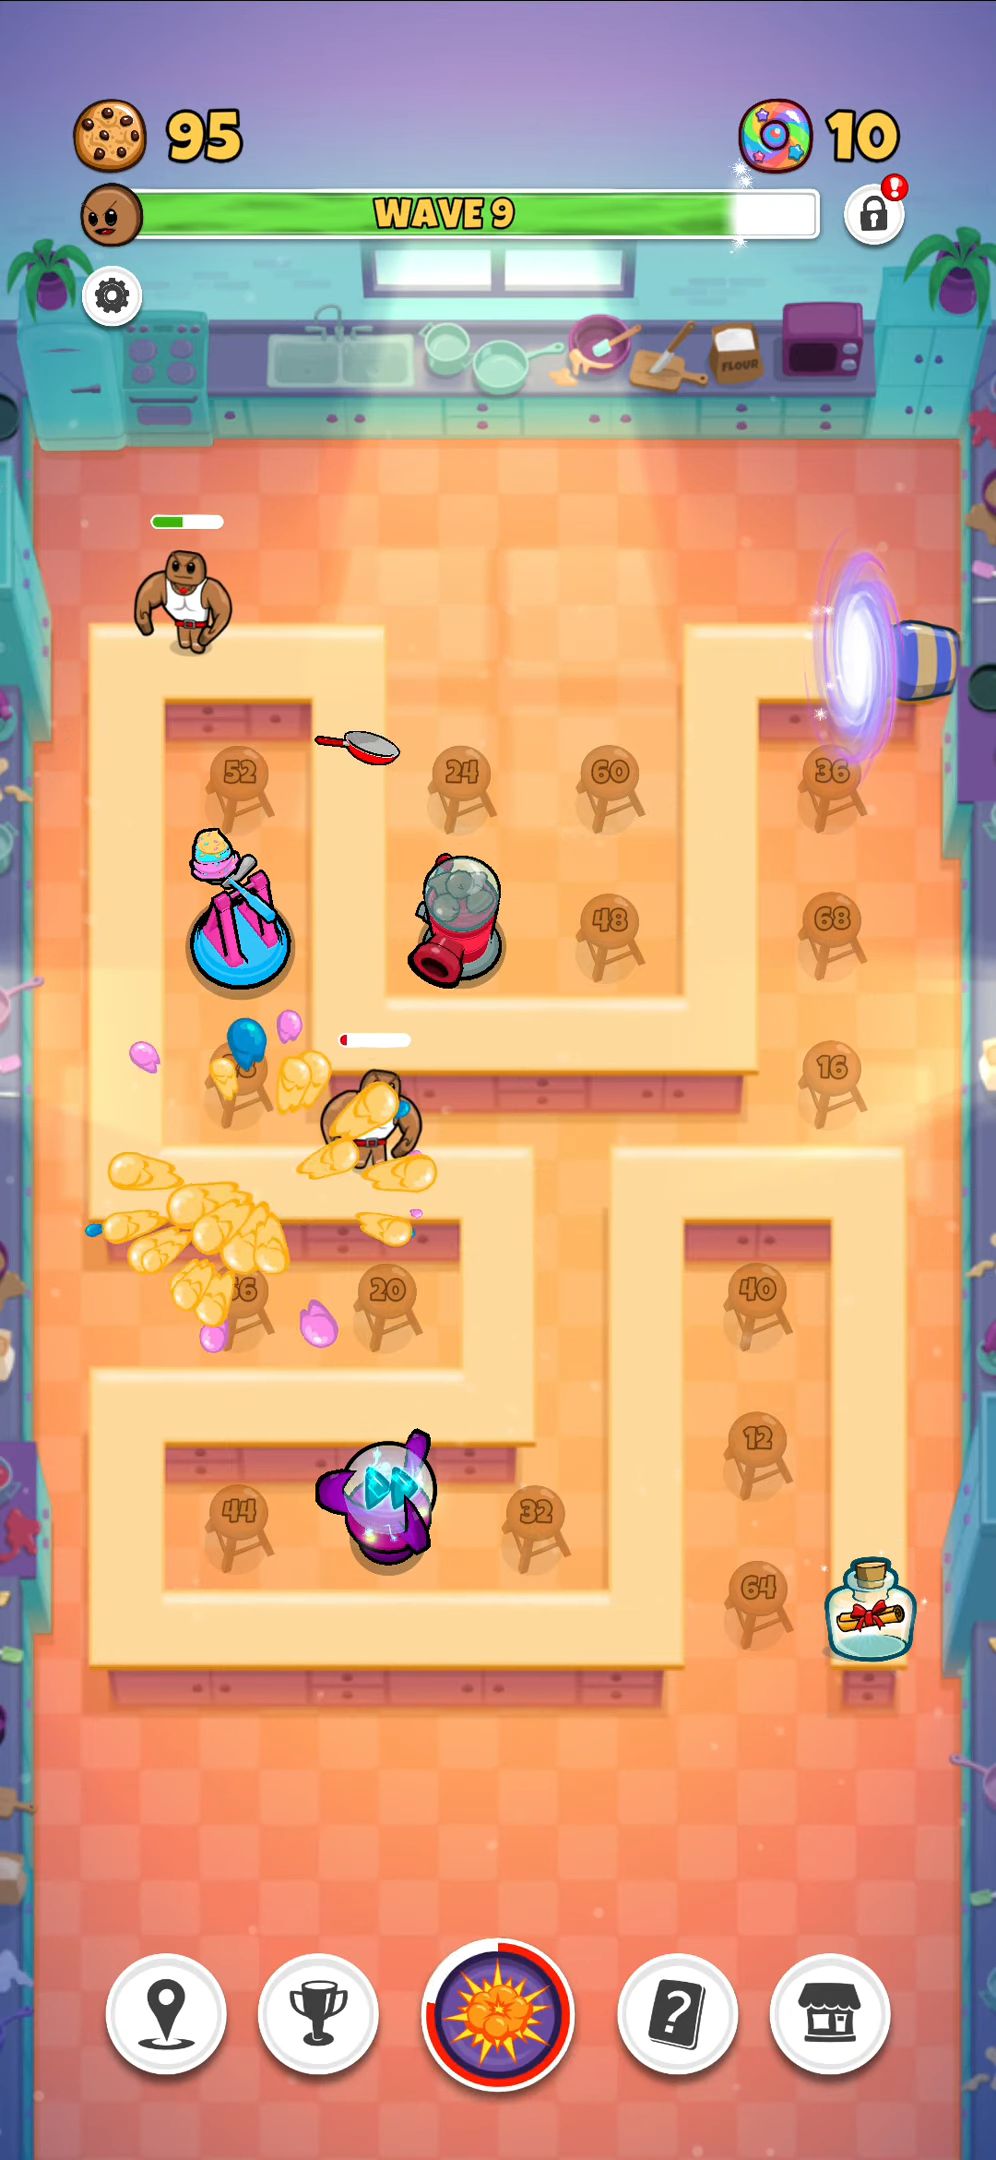 Cookies TD - Idle TD Endless Idle Tower Defense für Android